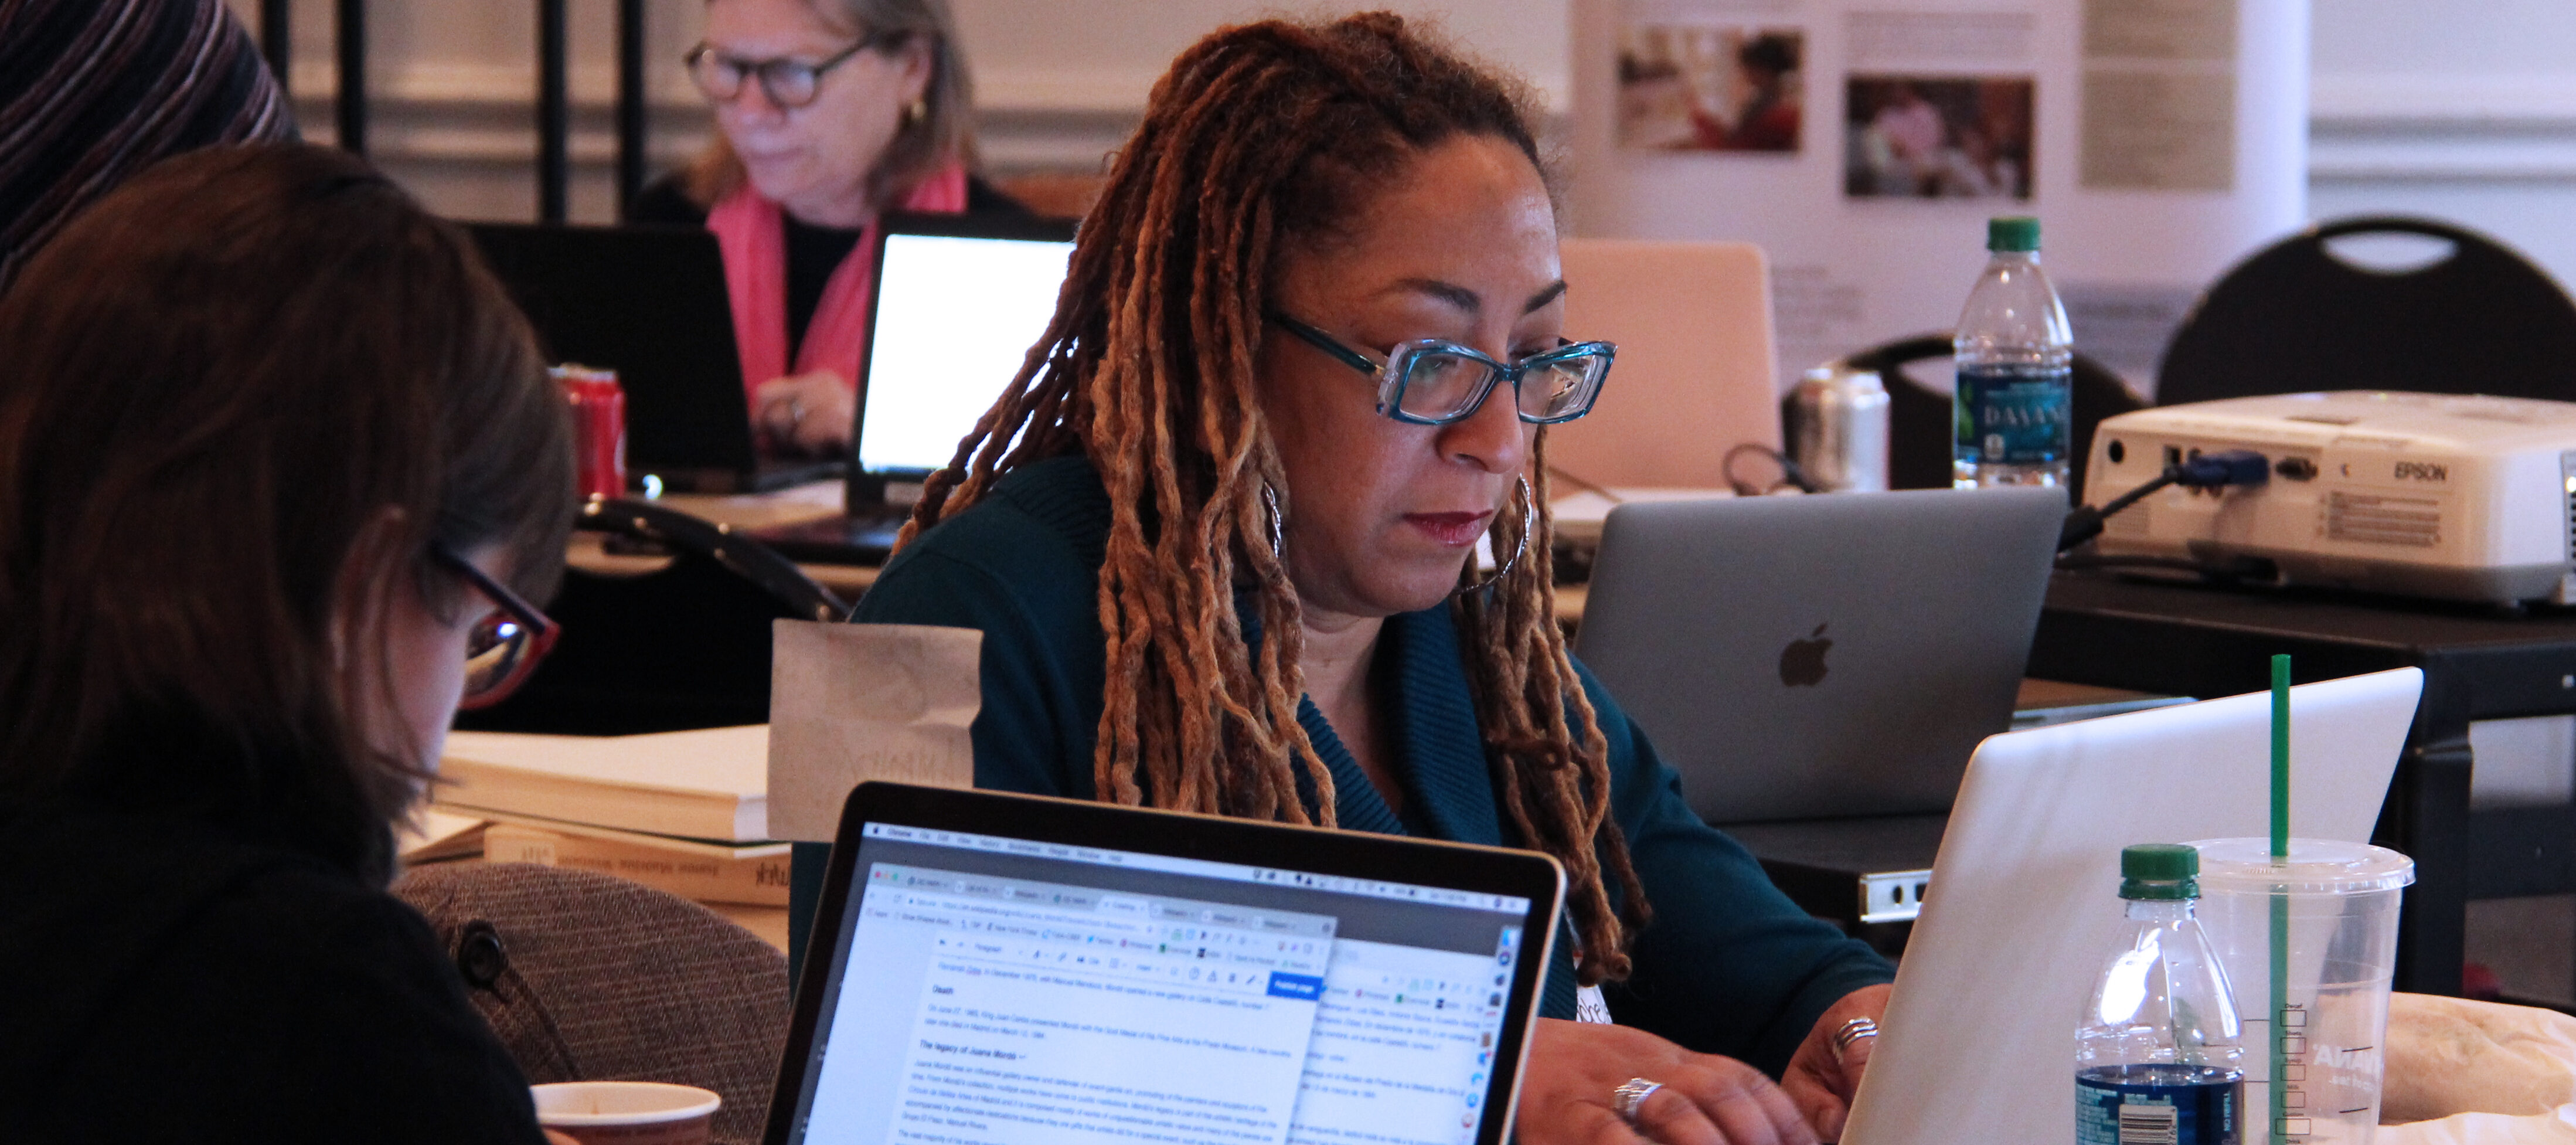 A woman with ombré dreadlocks sits at a table working on her laptop. Two other women are doing the same thing at different tables directly behind and in front of the woman.